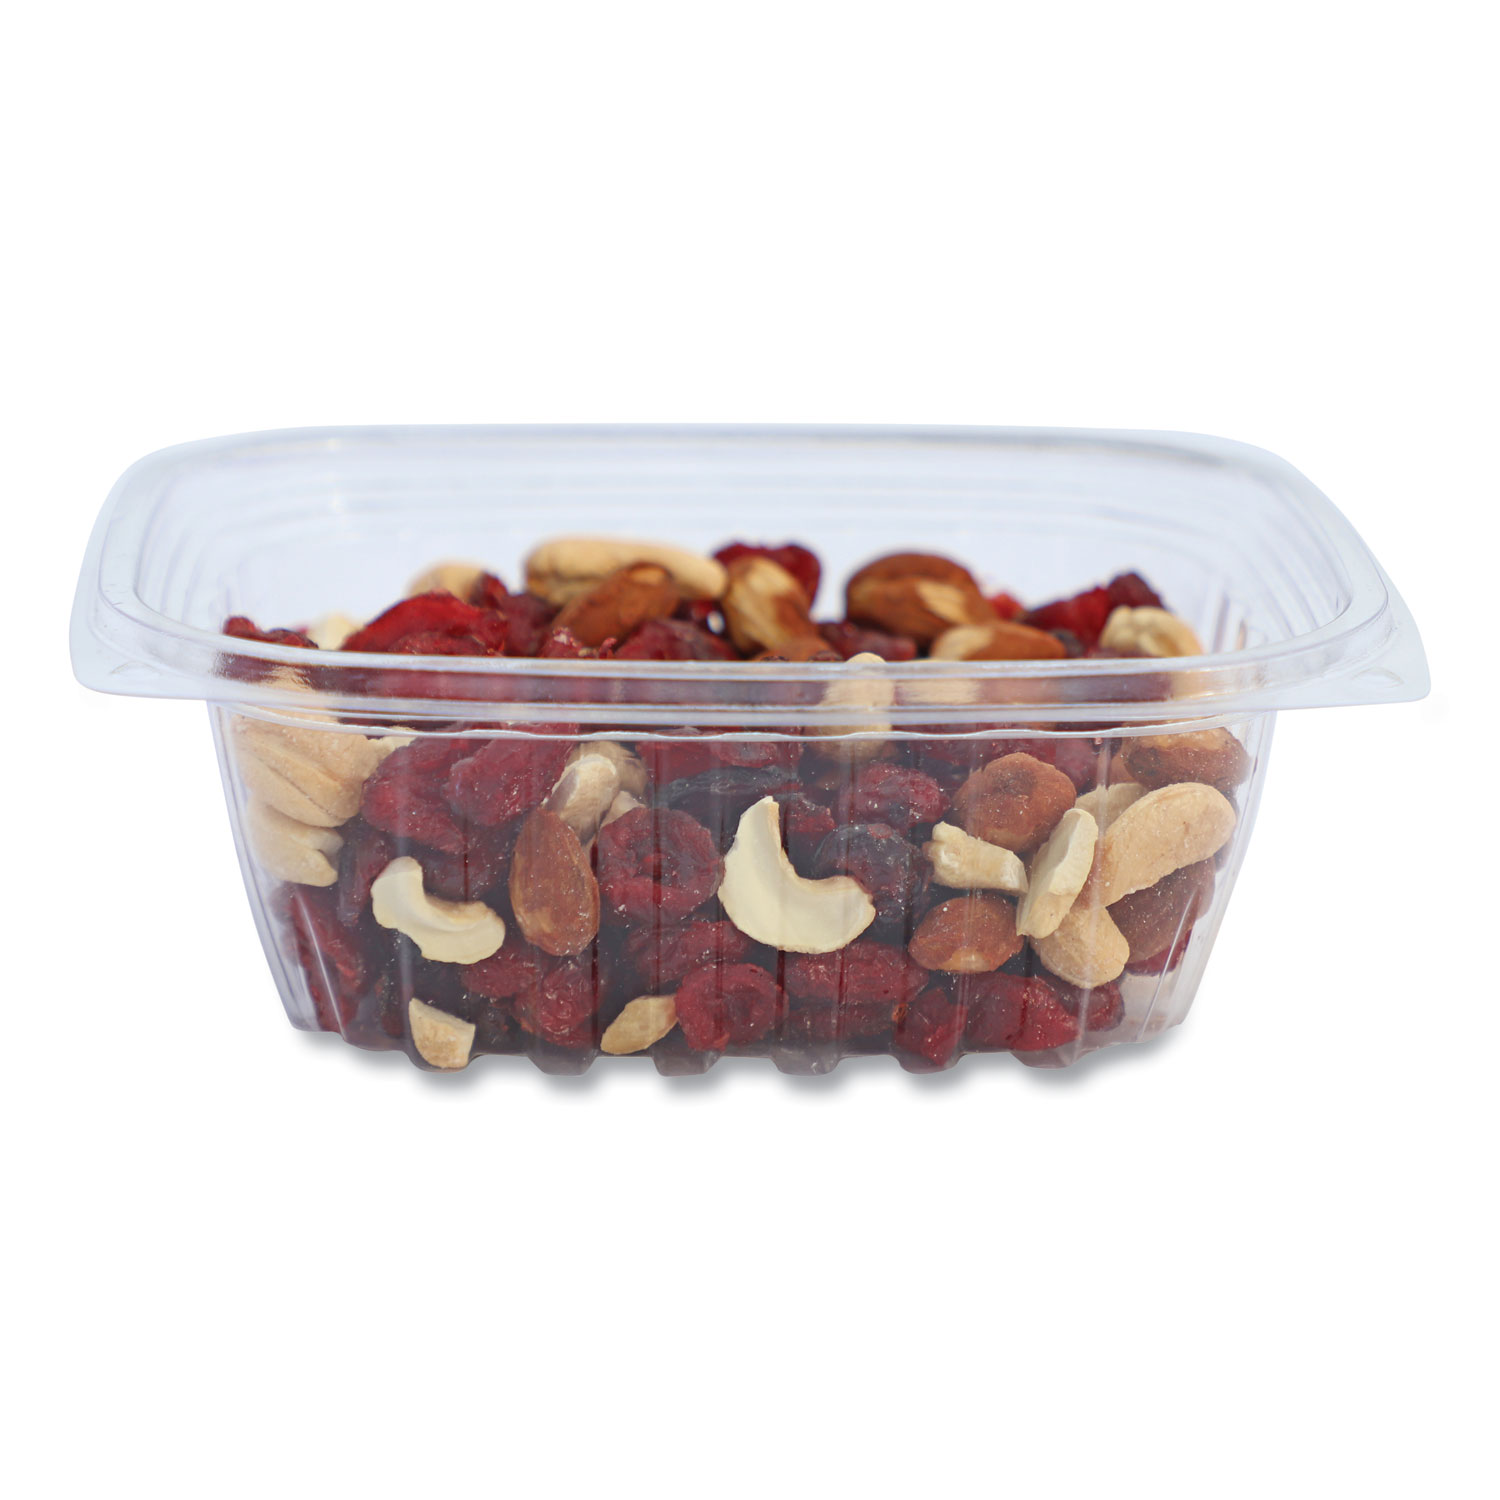  Eco-Products Clear Disposable Rectangular Deli